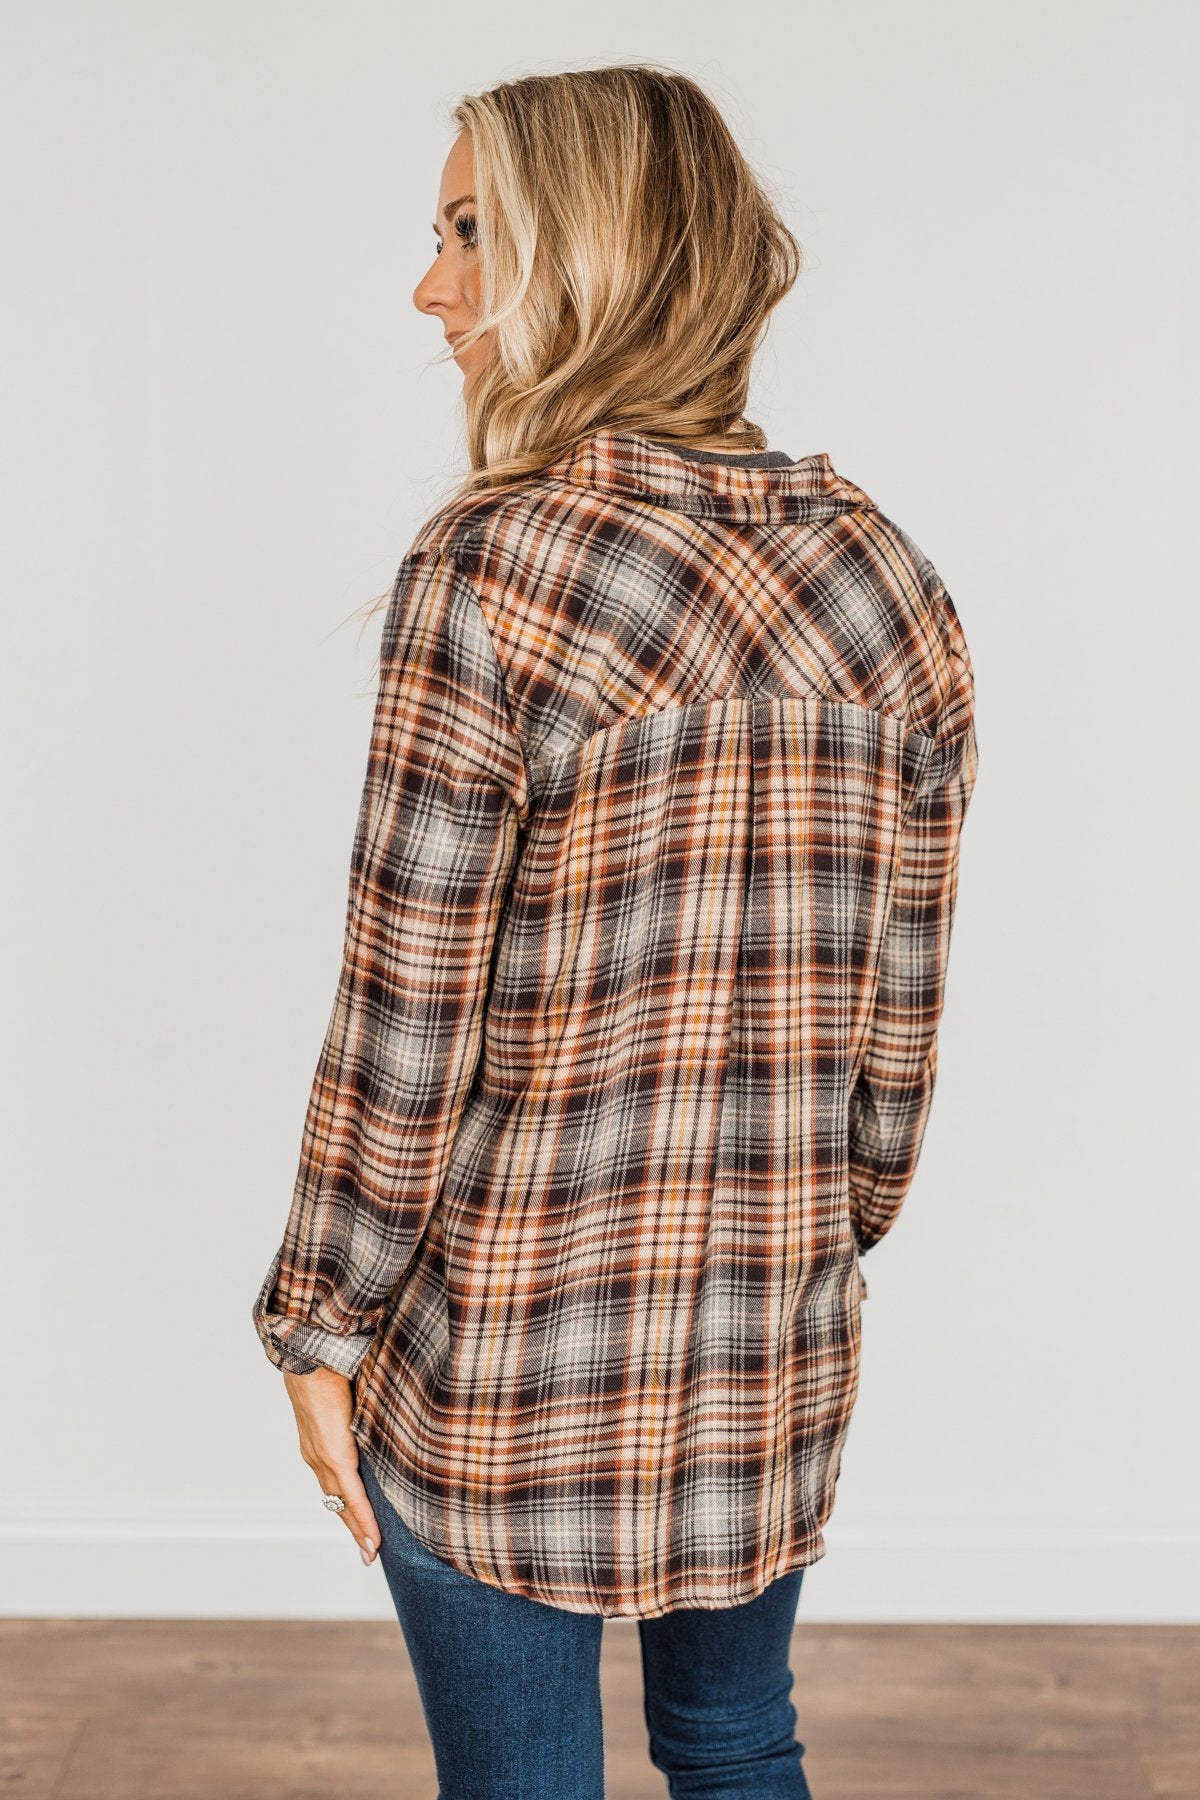 Harvest Wishes Button Down Plaid Top- Navy, Rust, & Oatmeal